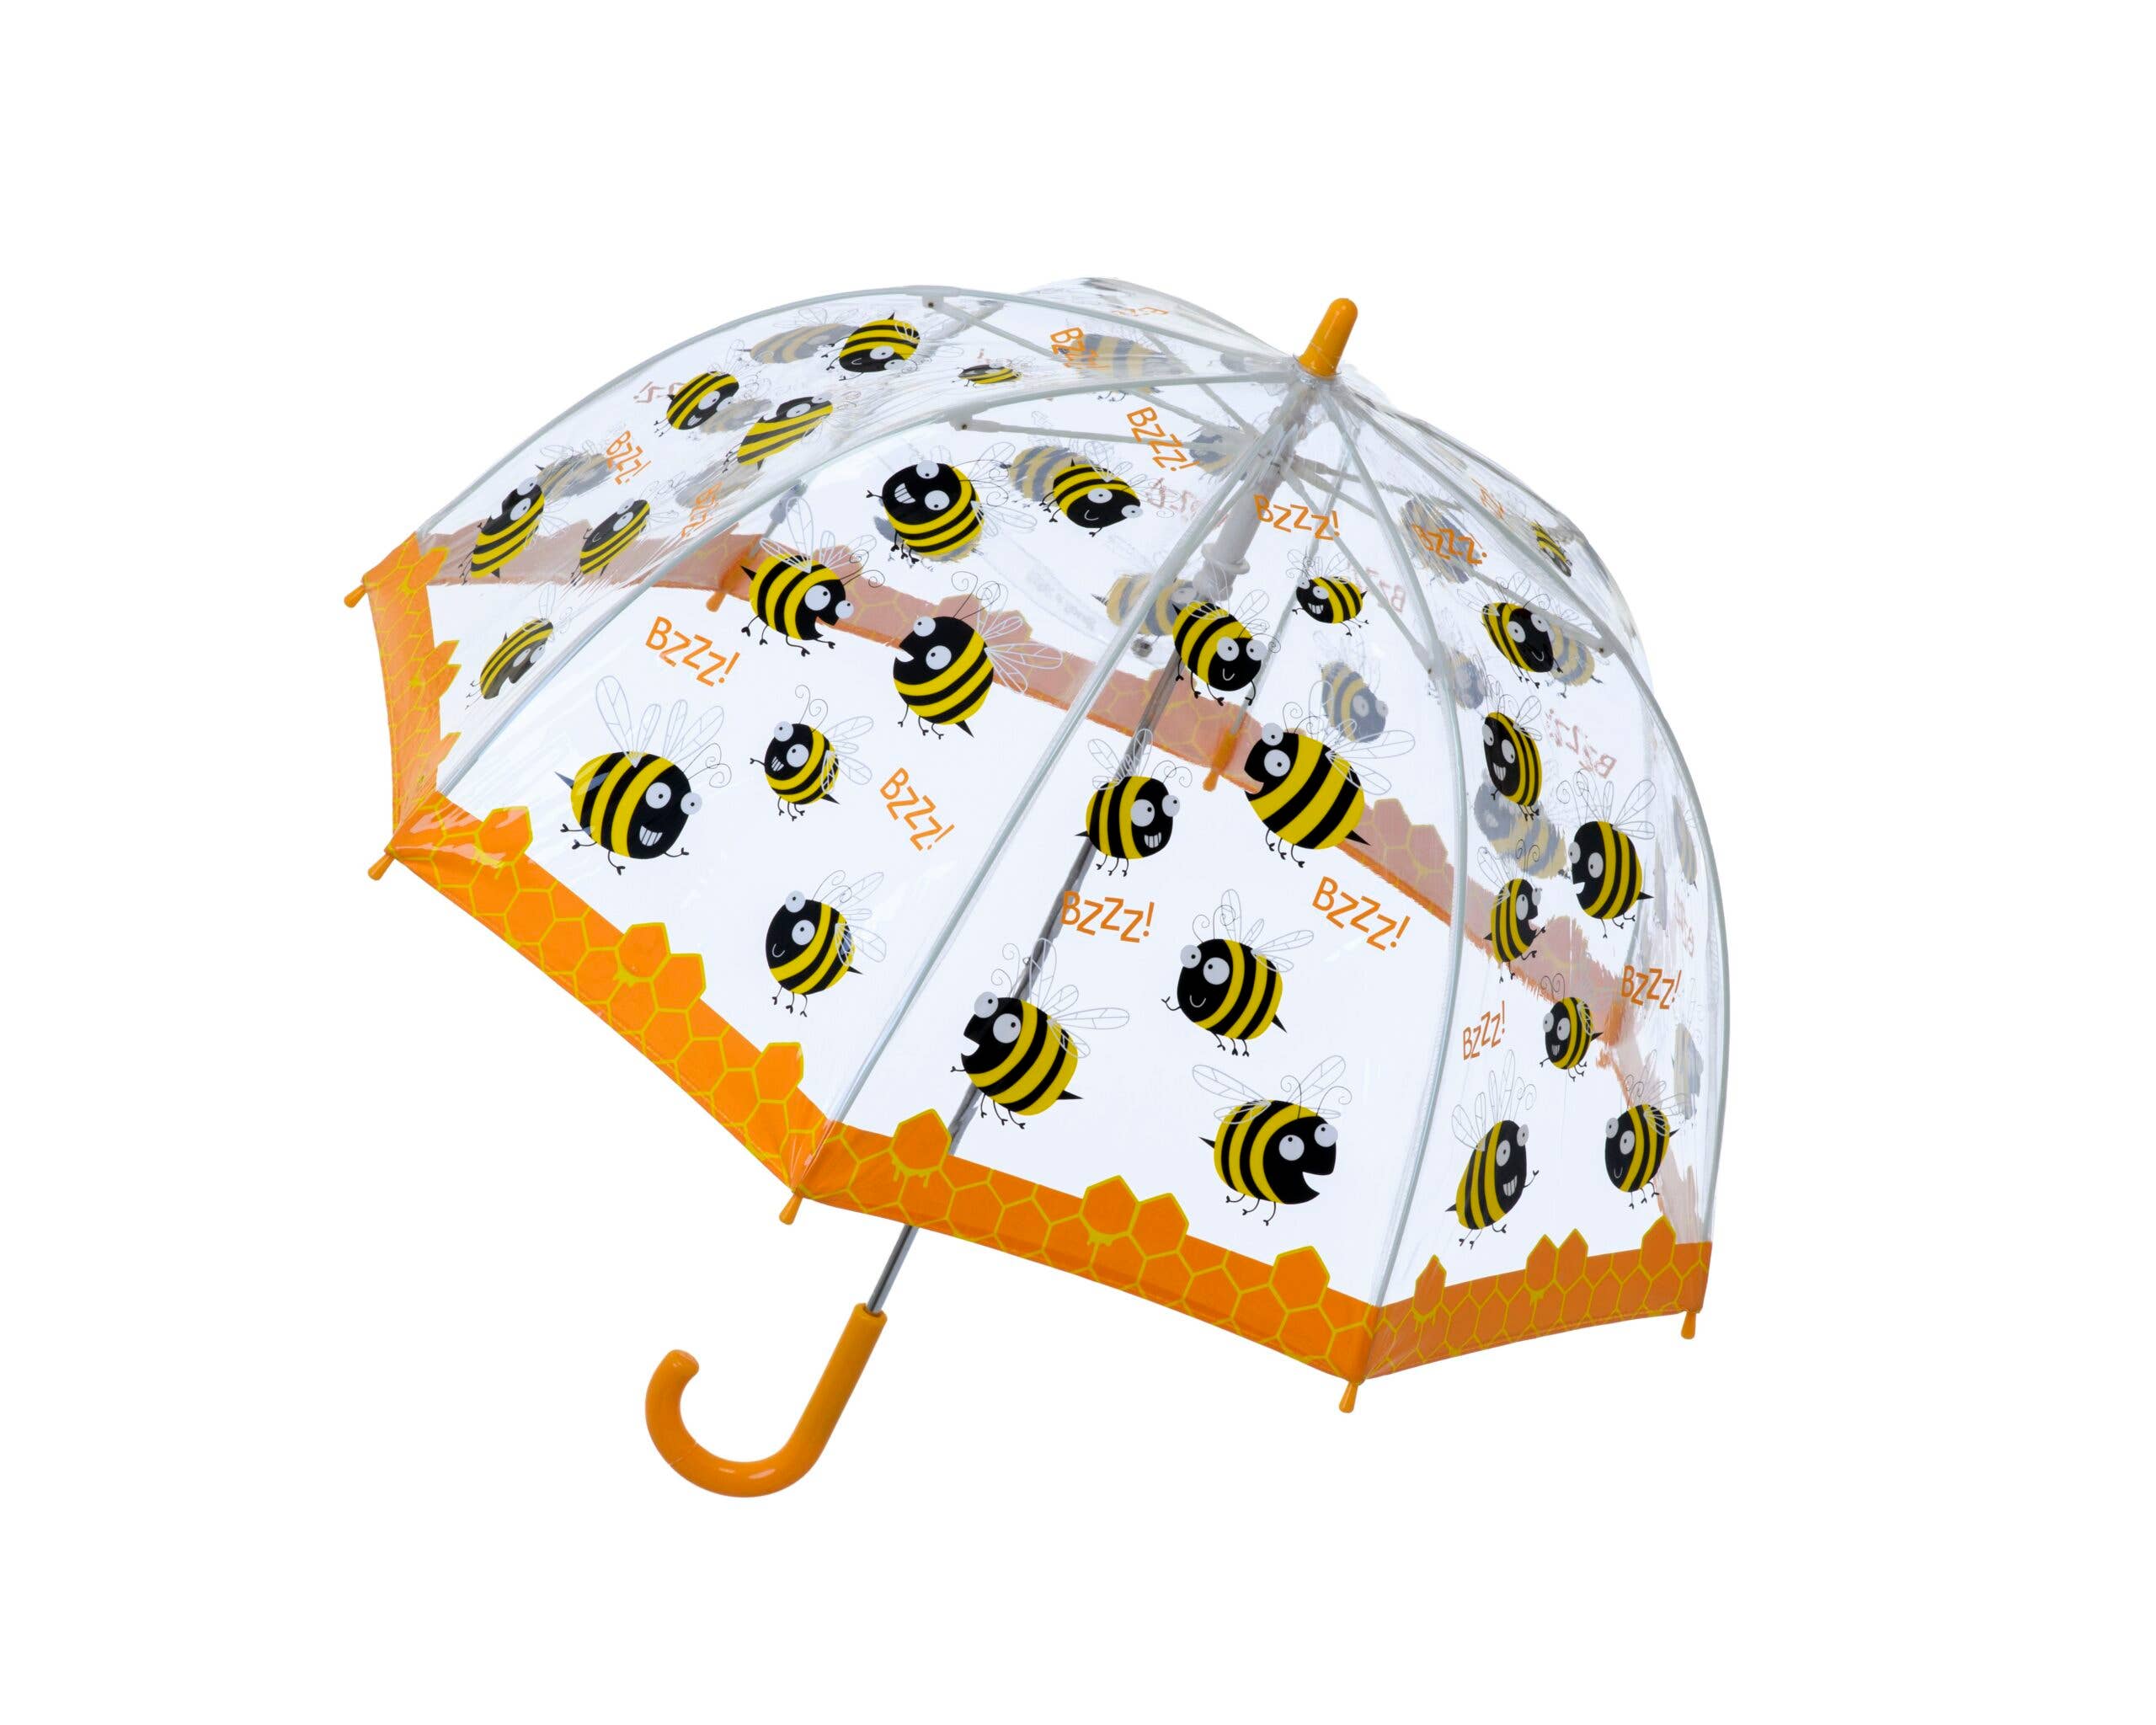 Bee PVC Umbrella for Children from the Soake Kids Collection